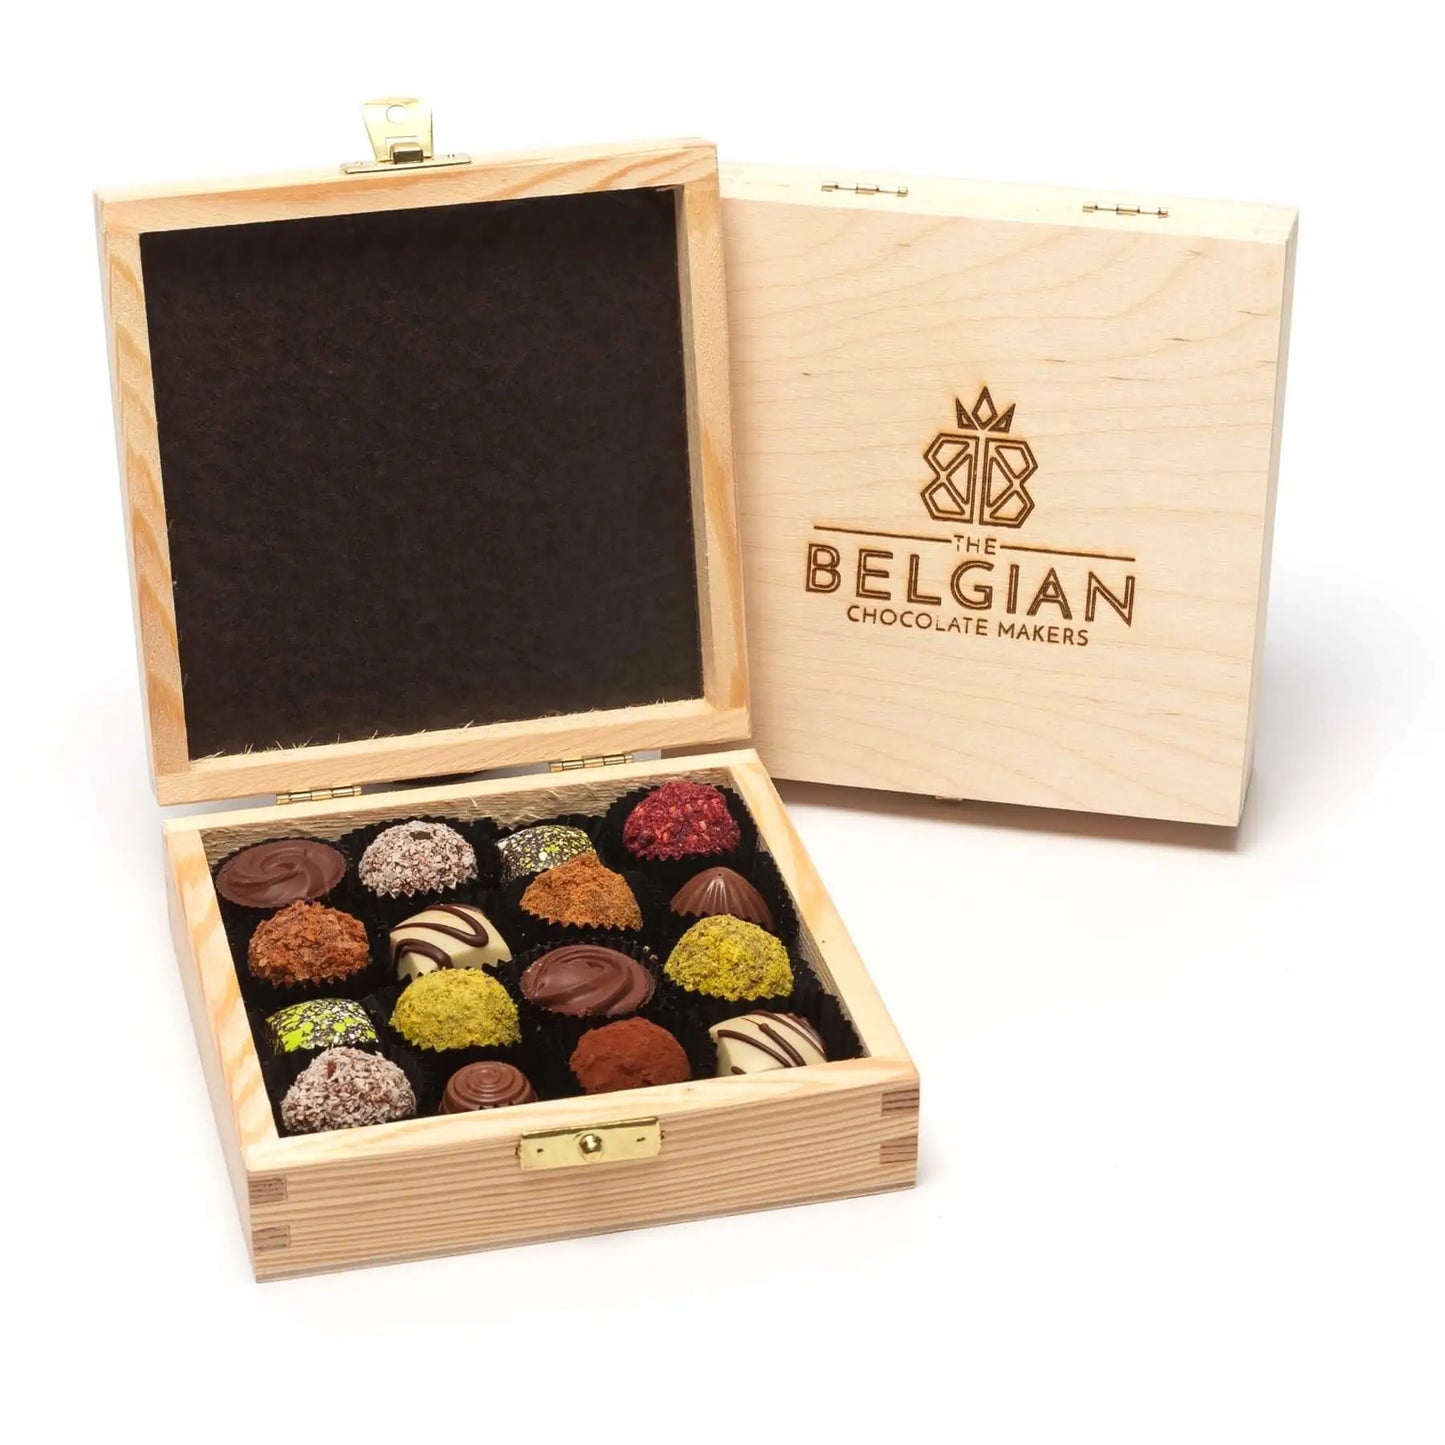 16 pralines and truffles in an engraved wooden box 260 Grs the Belgian chocolate makers faire